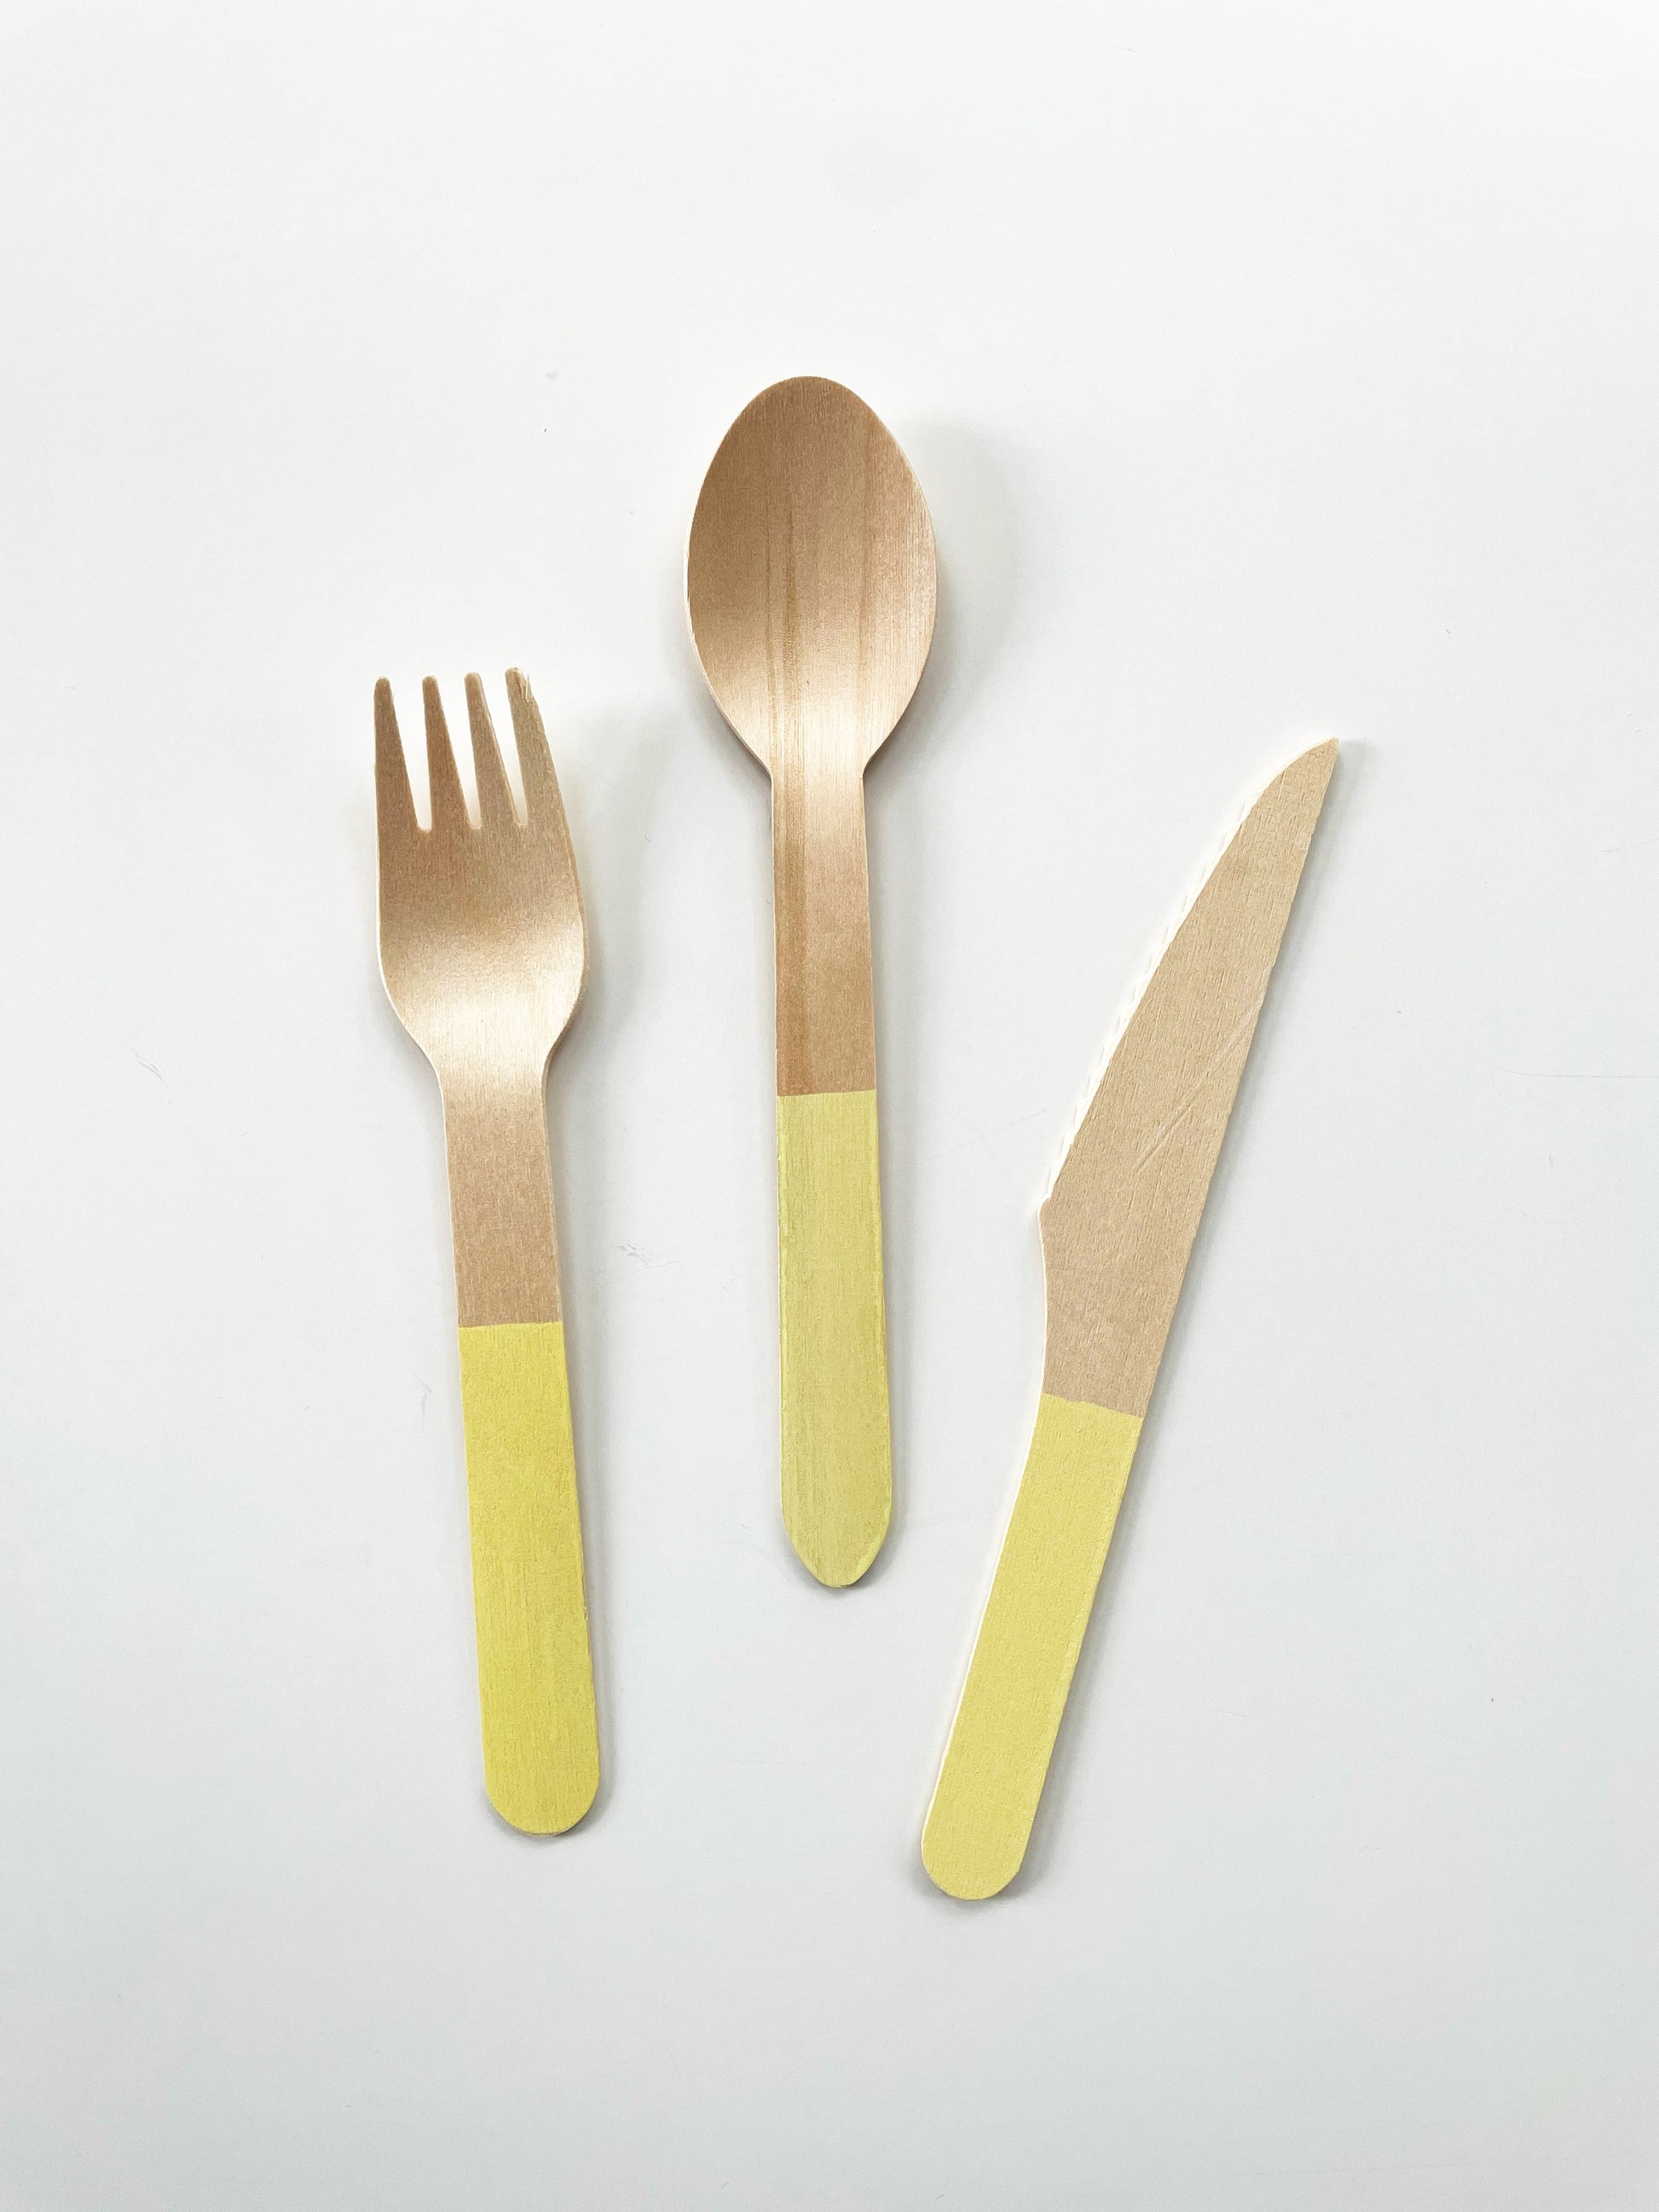 The Lemon party kit's yellow dipped wooden utensils, including a fork, spoon and knife.